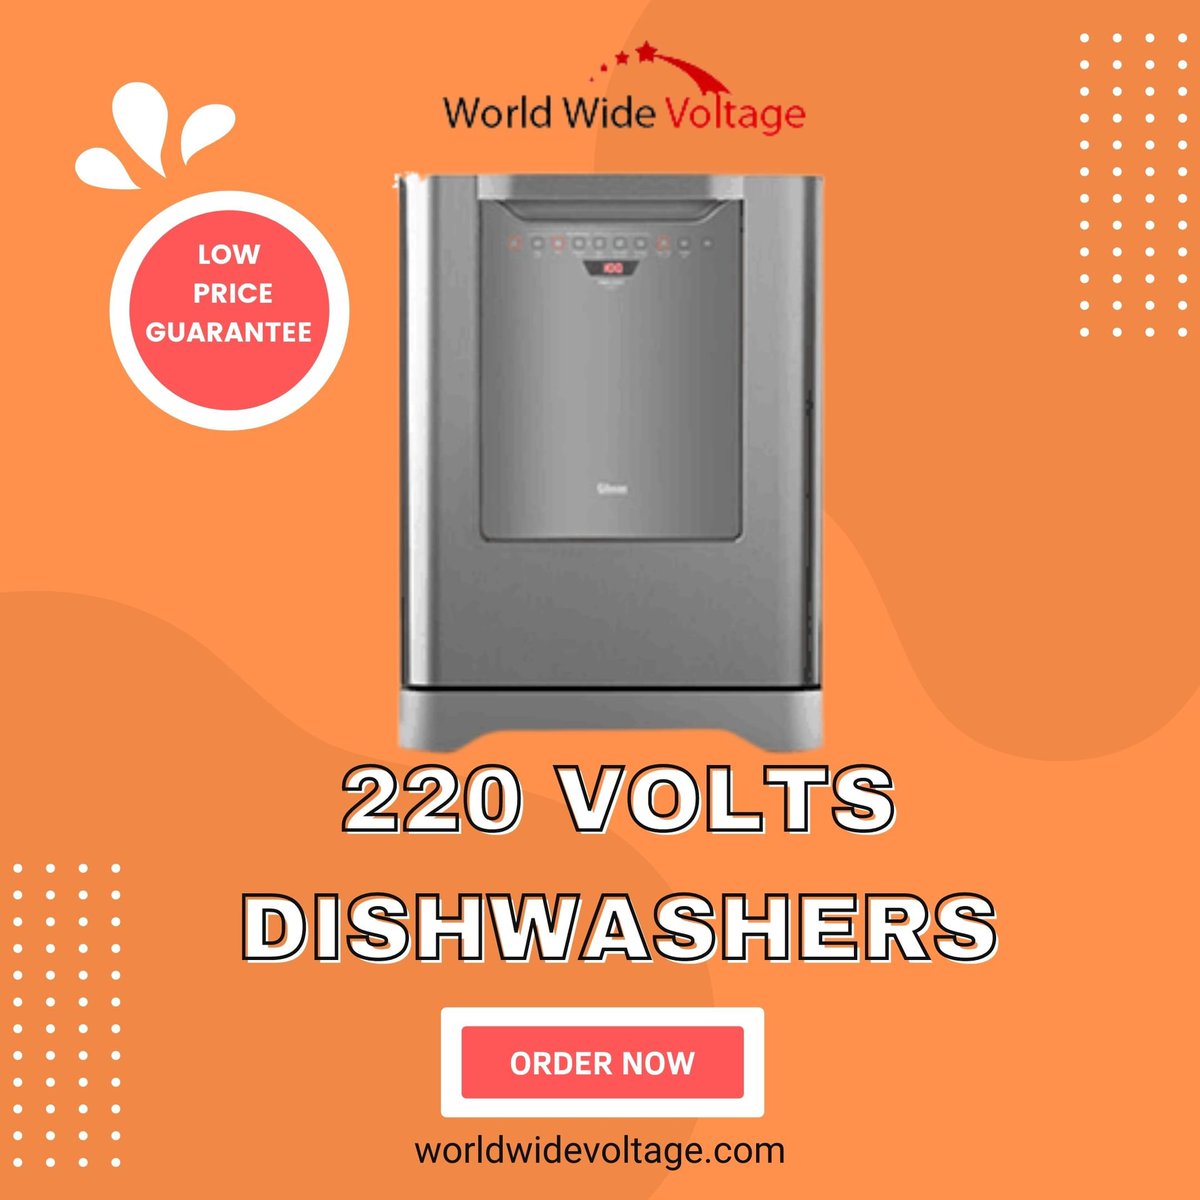 Upgrade your kitchen with 220-volt dishwashers from worldwidevoltage.com! Say goodbye to the hassle of hand washing and hello to sparkling clean dishes with ease. worldwidevoltage.com/dishwasher-for… 
#KitchenUpgrade #Appliances #KitchecnAppliances #220VoltDishwashers #Dishwashers